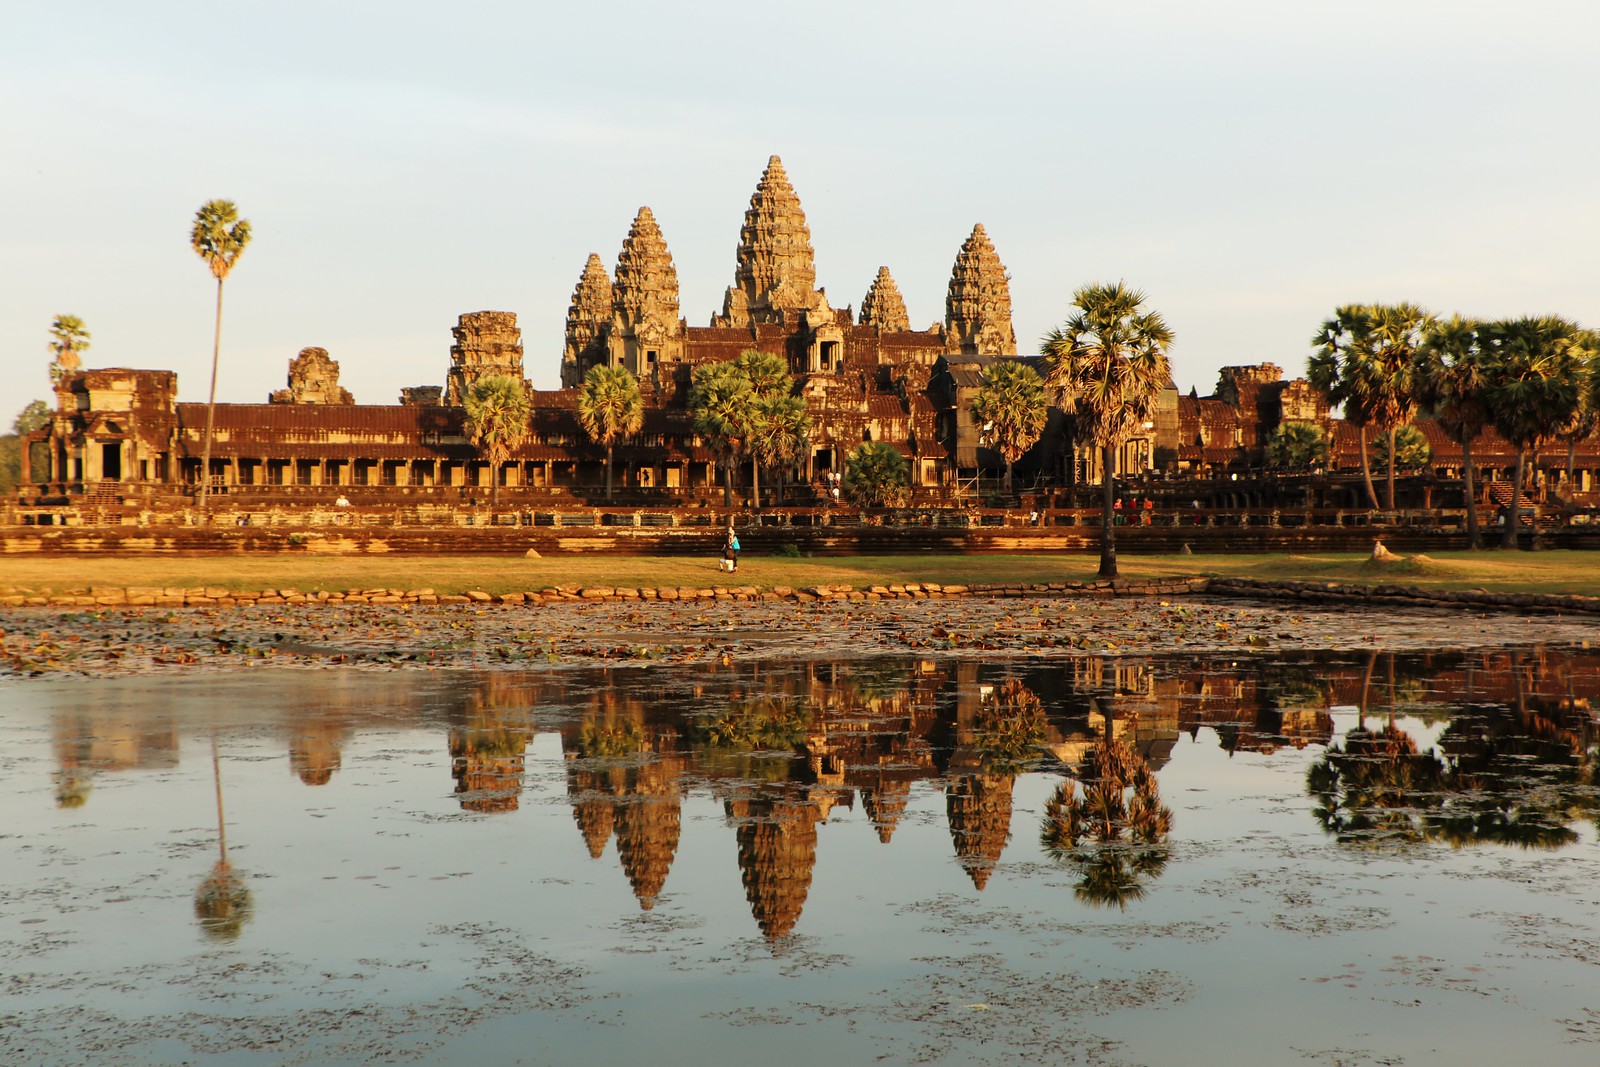 Angkor Wat - The Largest Religious Temple Complex